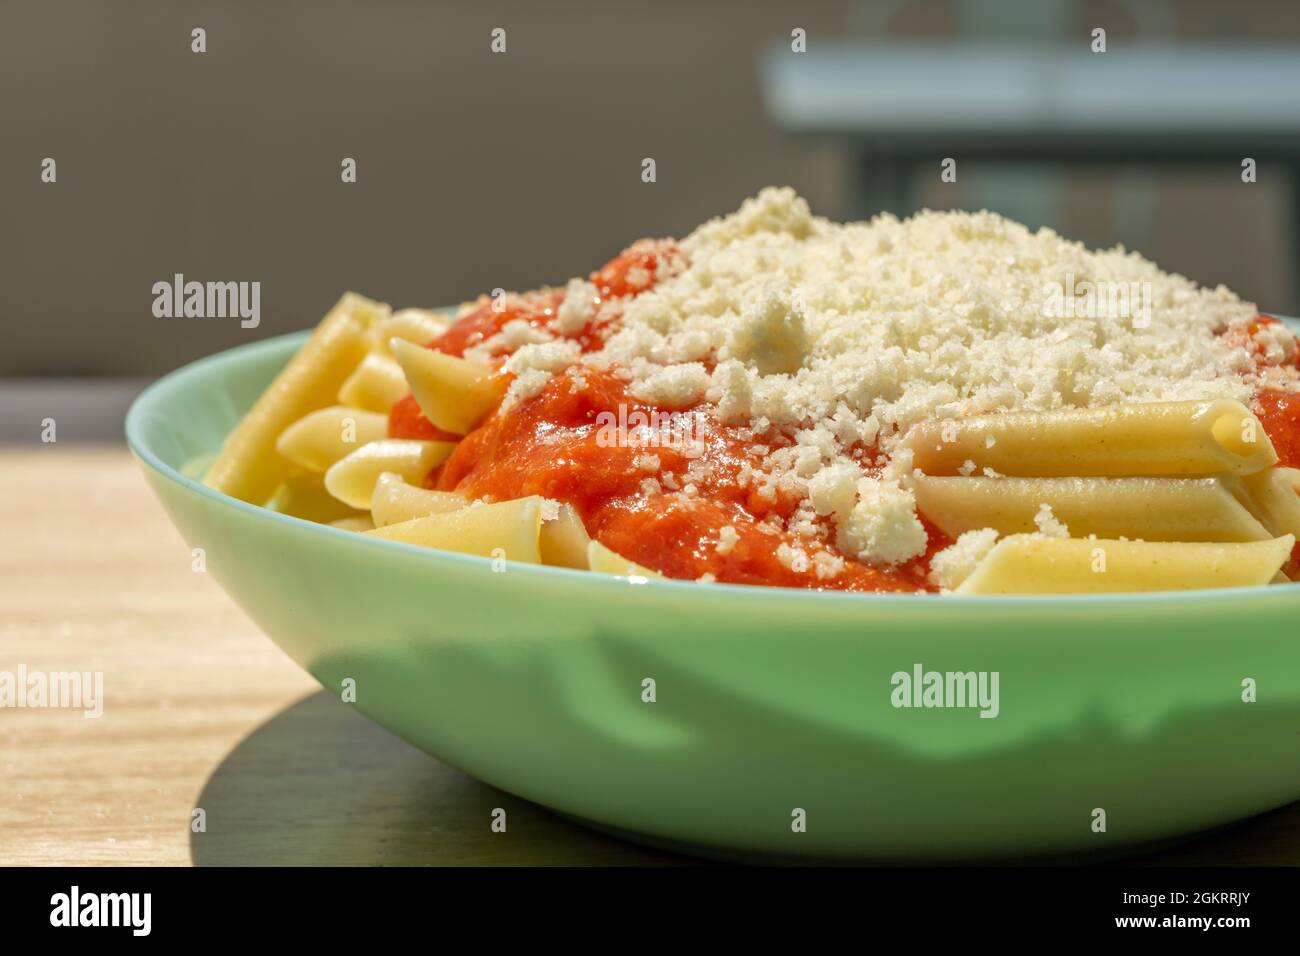 Popular recipe for children of macaroni with tomato and grated cheese on a blue plate Stock Photo